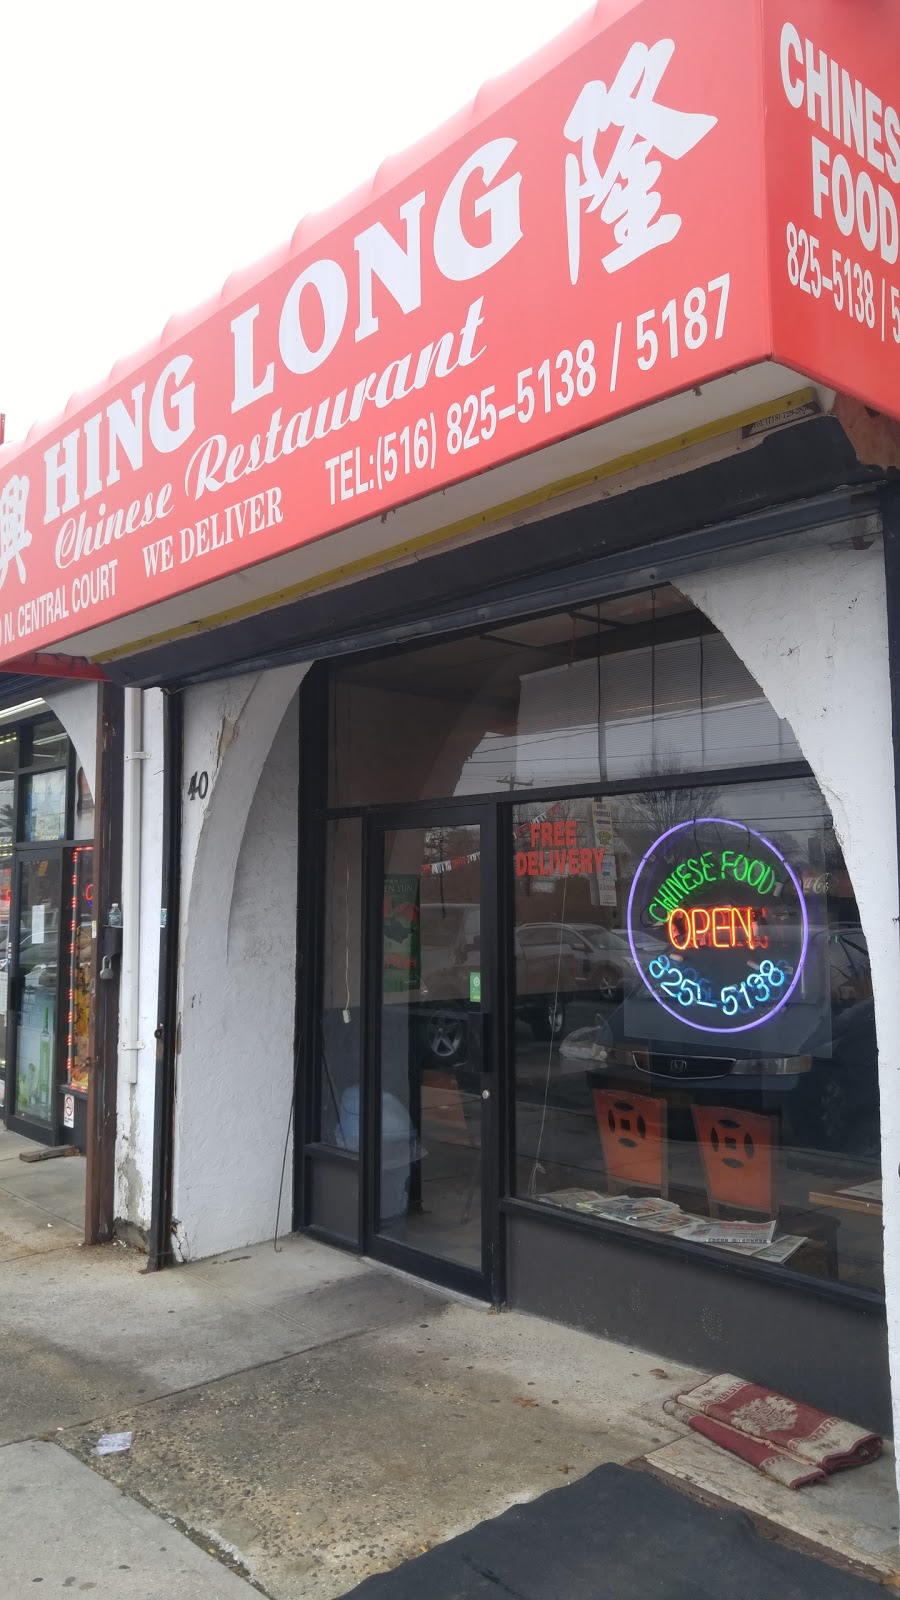 Hing Long Kitchen | 40 Central Ct #2, Valley Stream, NY 11580 | Phone: (516) 825-5138